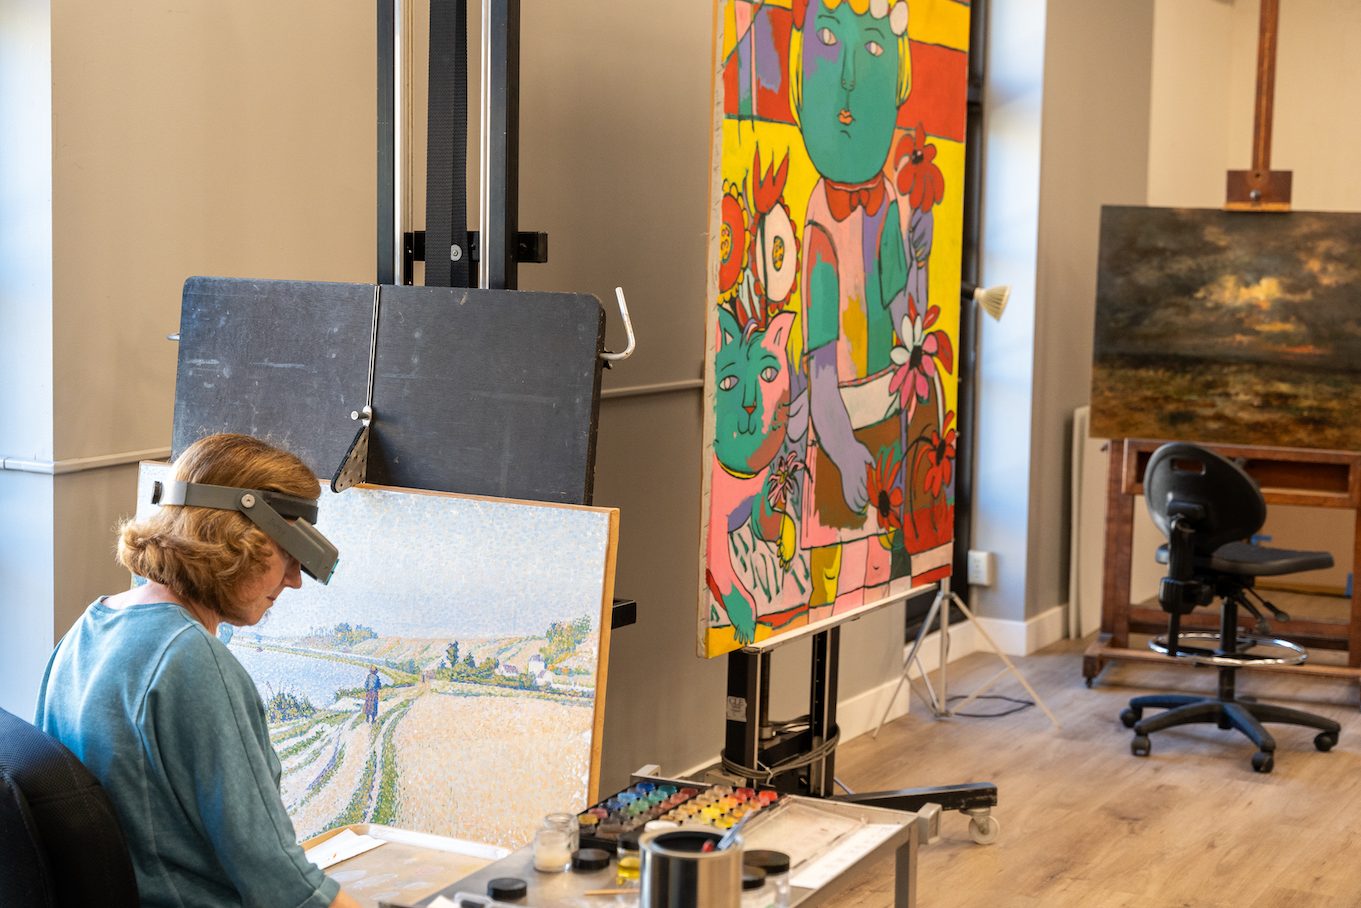 An art conservator works at an easel with a paint brush, paints,  and several other paintings in the background